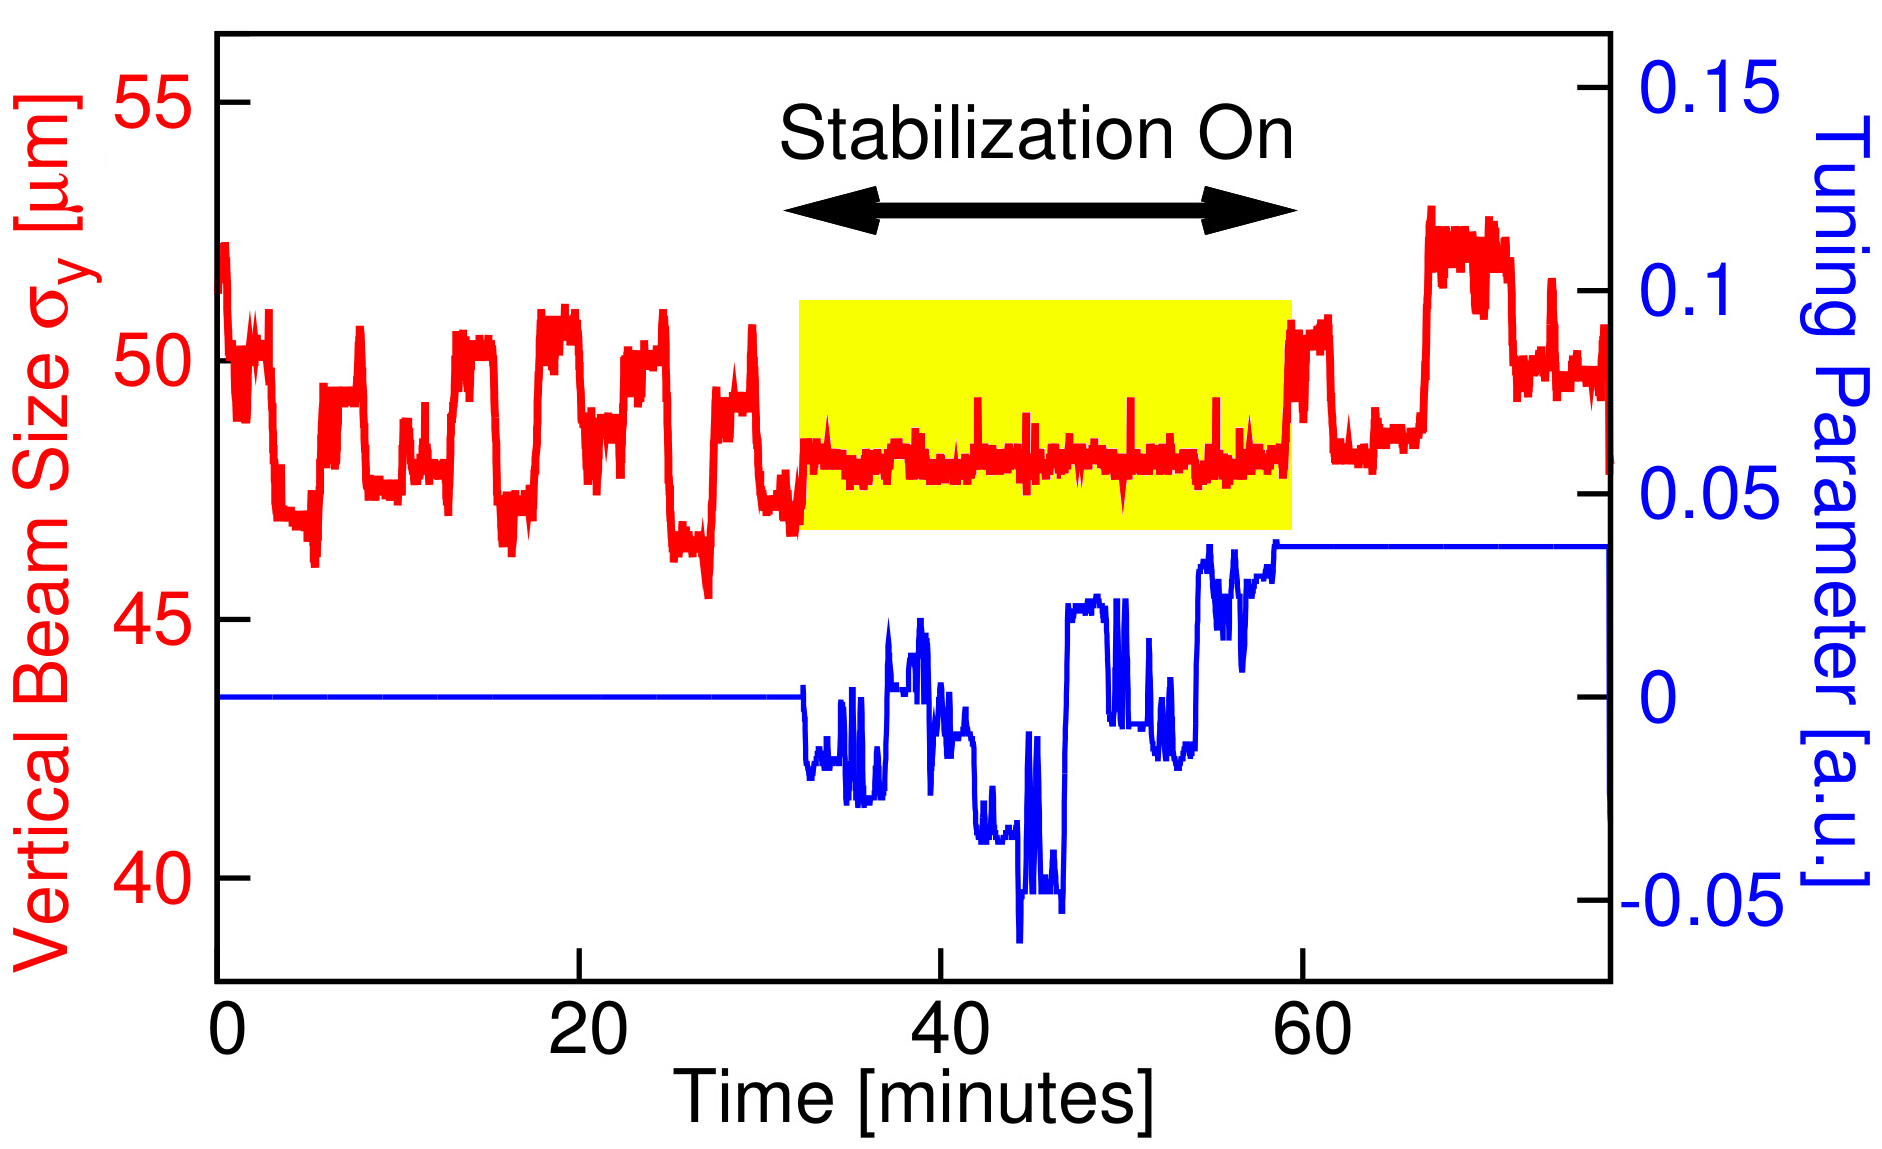 Red line flattens when stabilization is on; blue line fluctuates during the same interval.